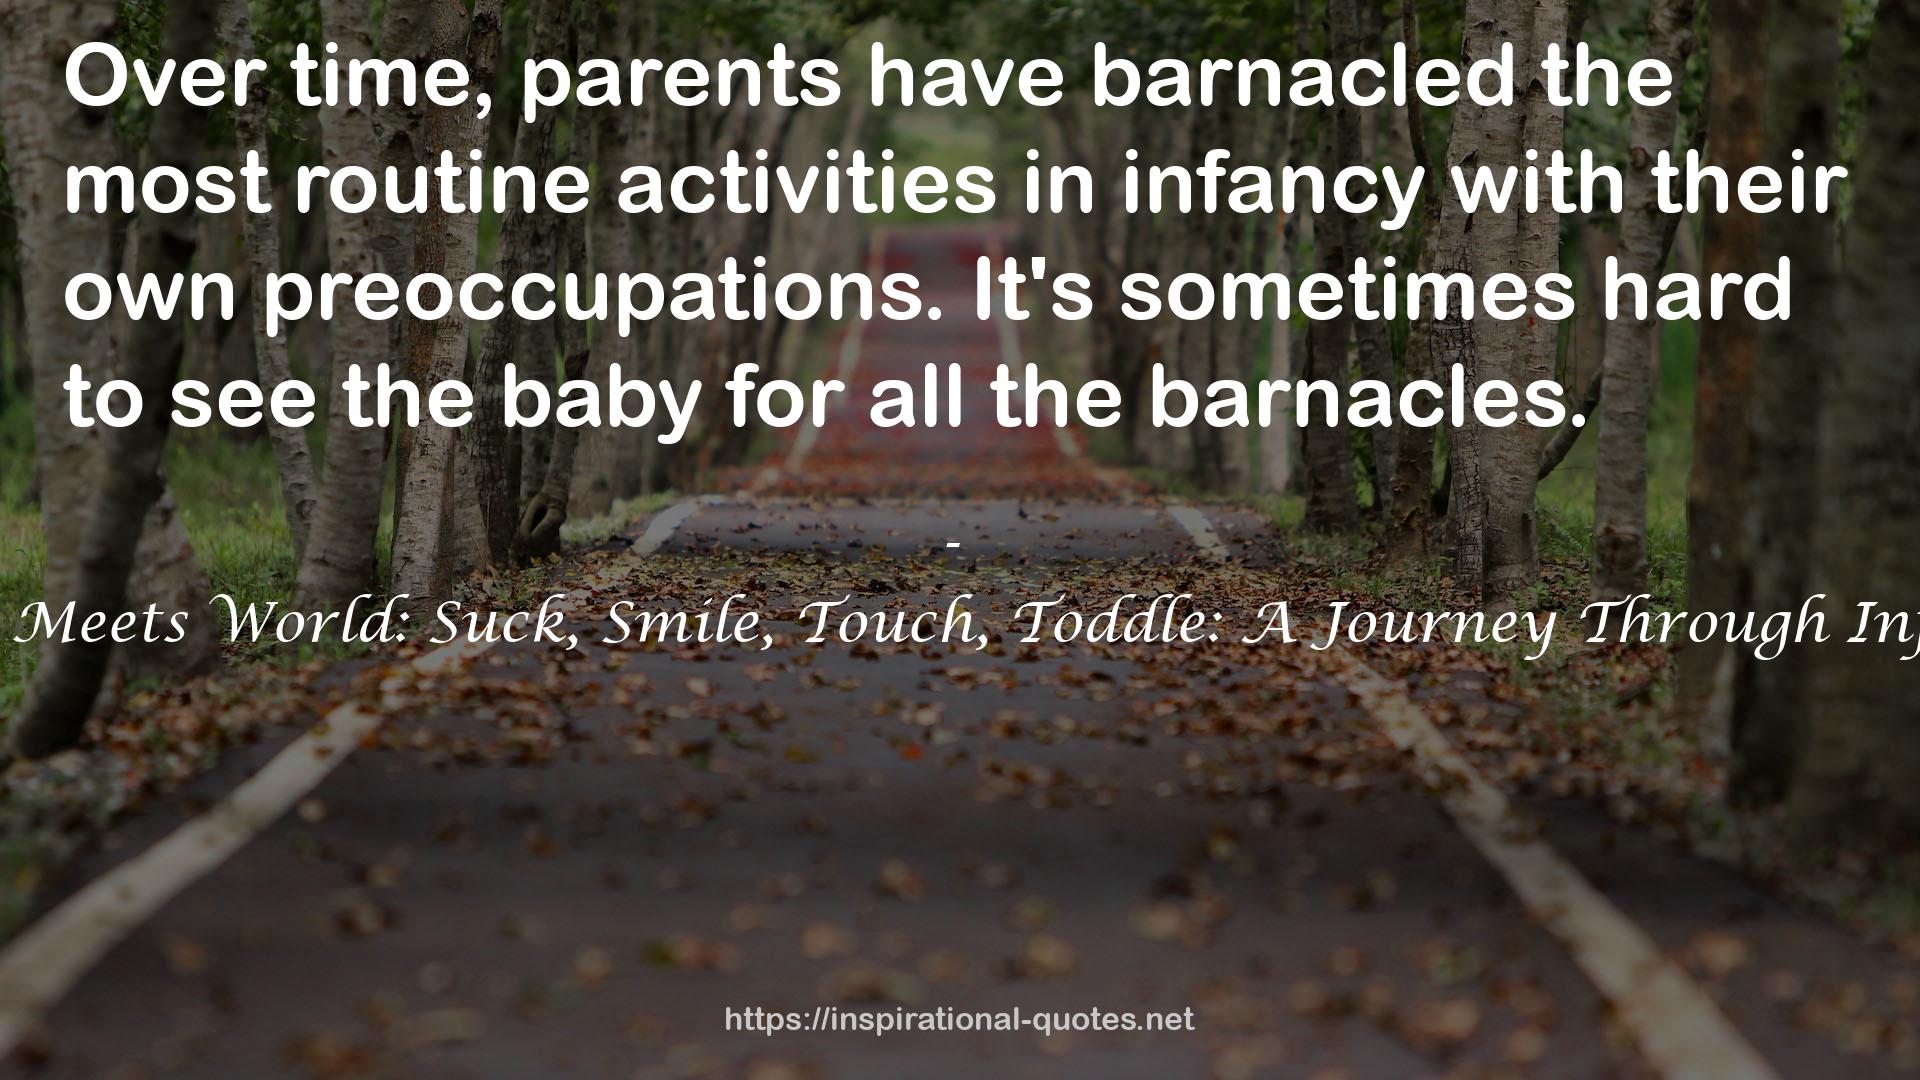 Baby Meets World: Suck, Smile, Touch, Toddle: A Journey Through Infancy QUOTES